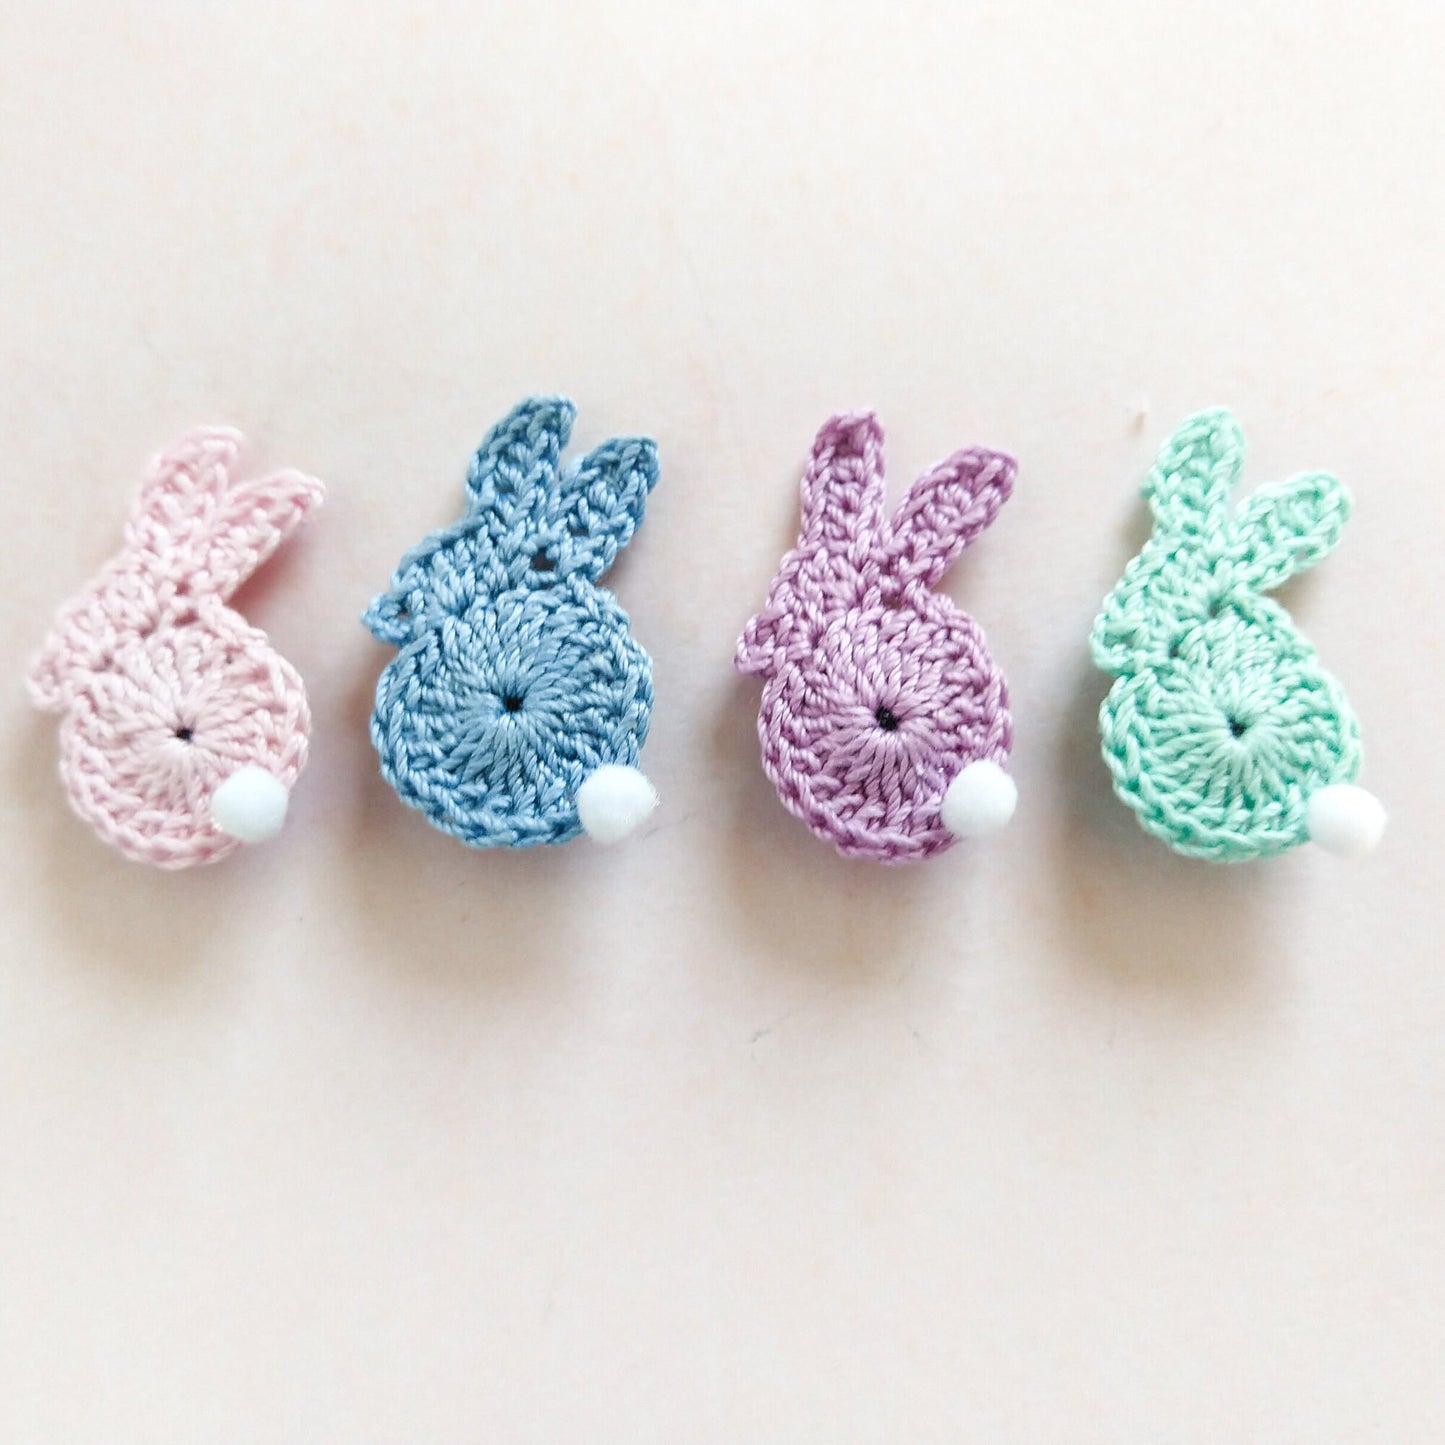 Bunny Magnets - Set of 4